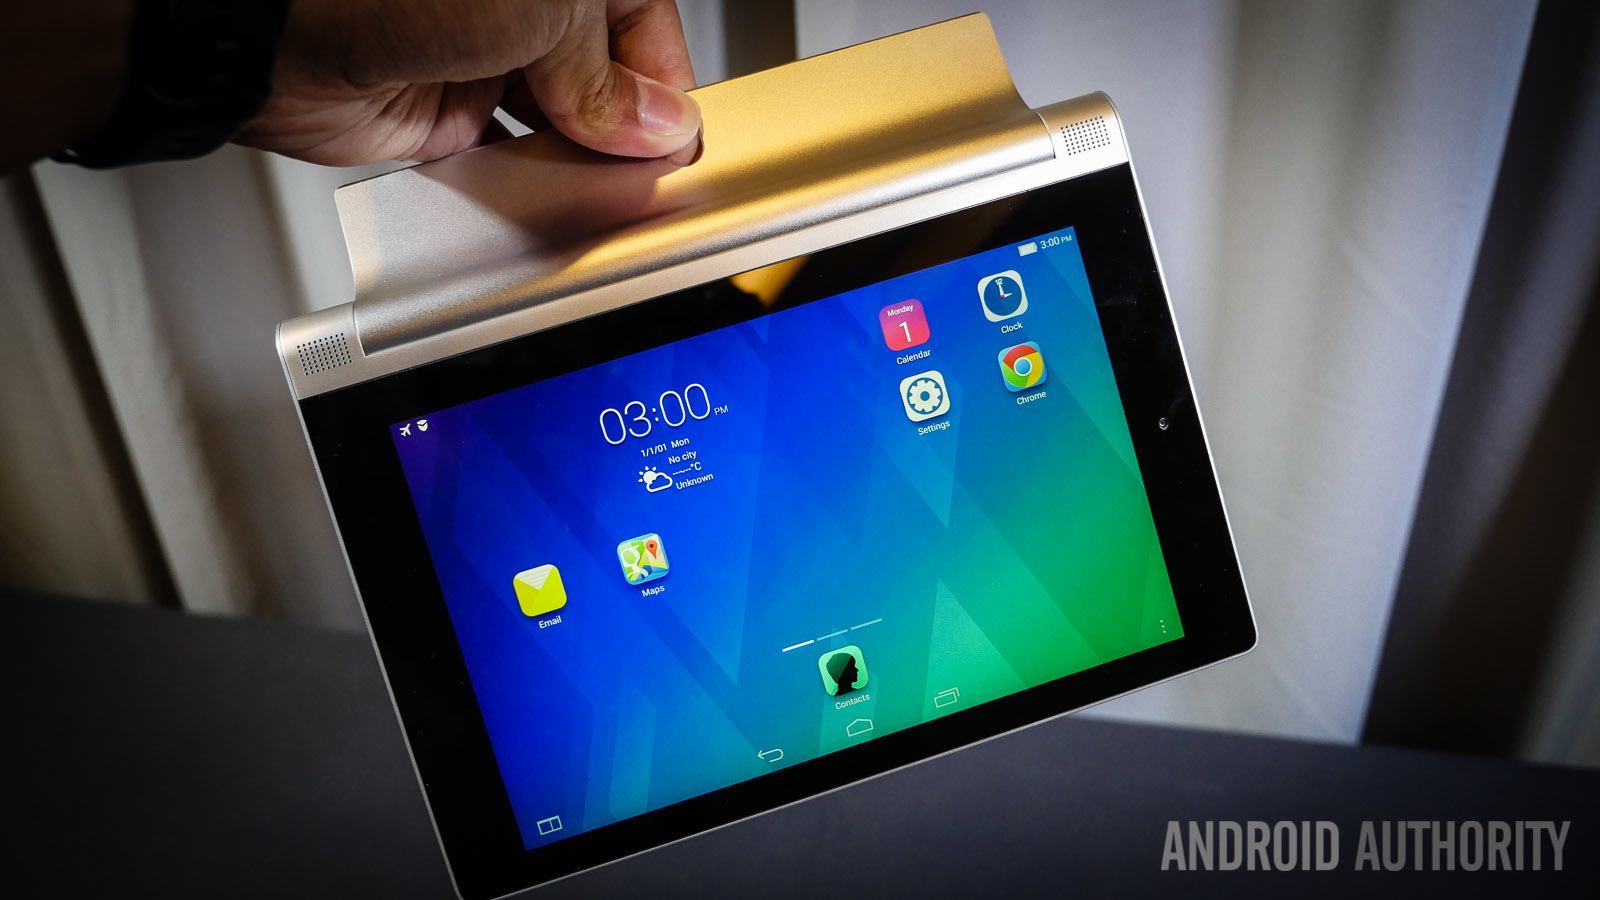 lenovo yoga tablet 2 8 and 10 first look aa (9 of 24)